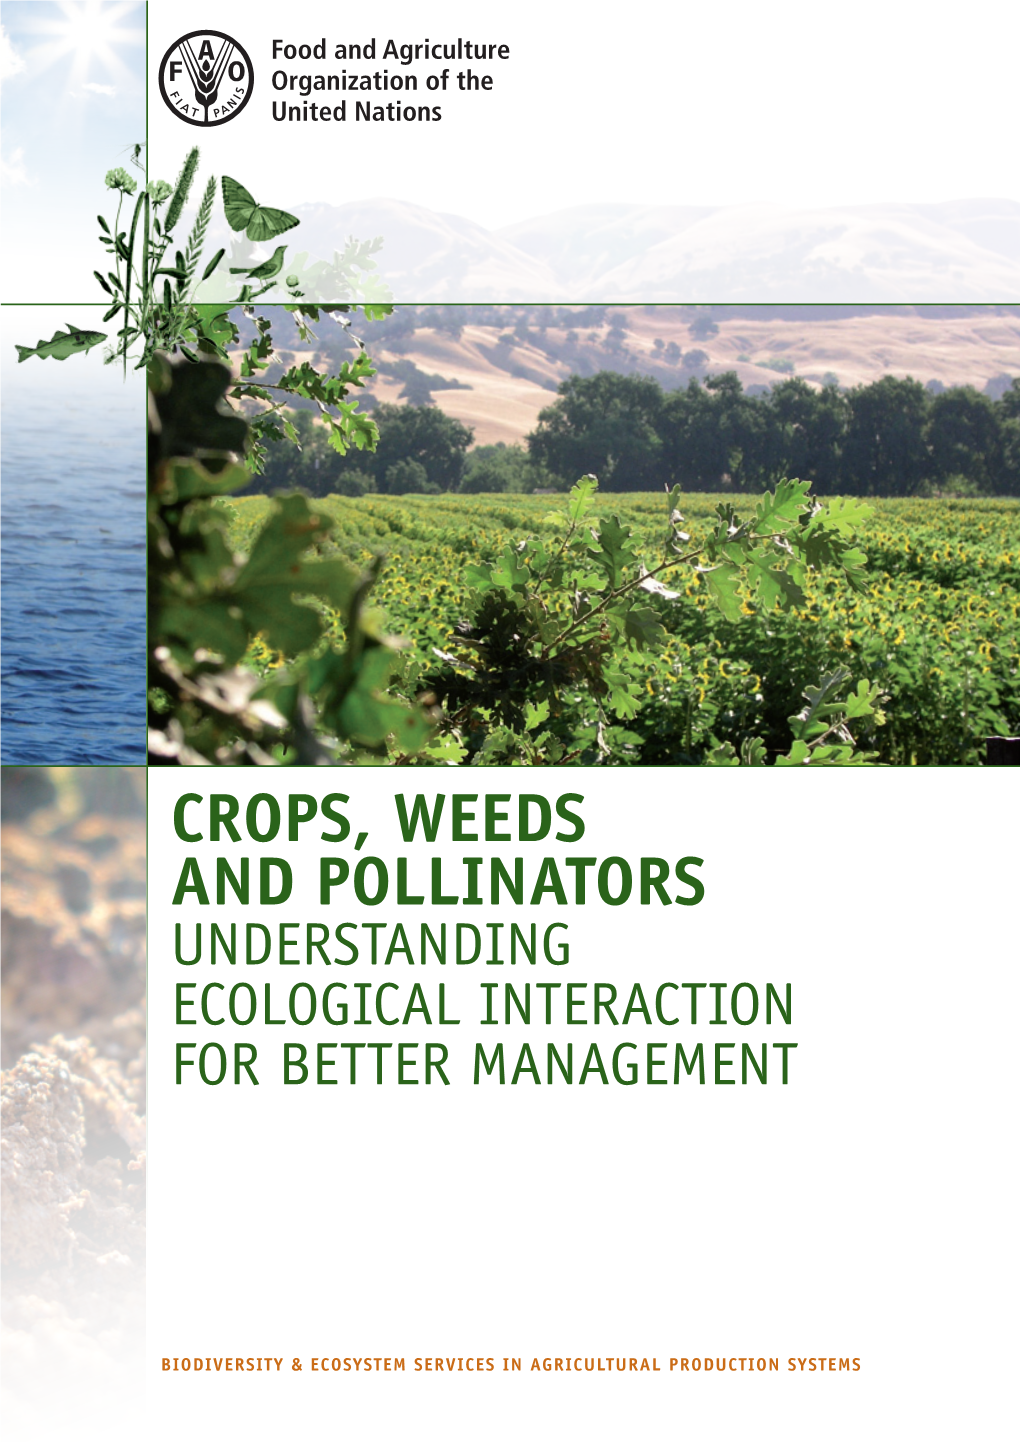 Crops, Weeds and Pollinators Understanding Ecological Interaction for Better Management